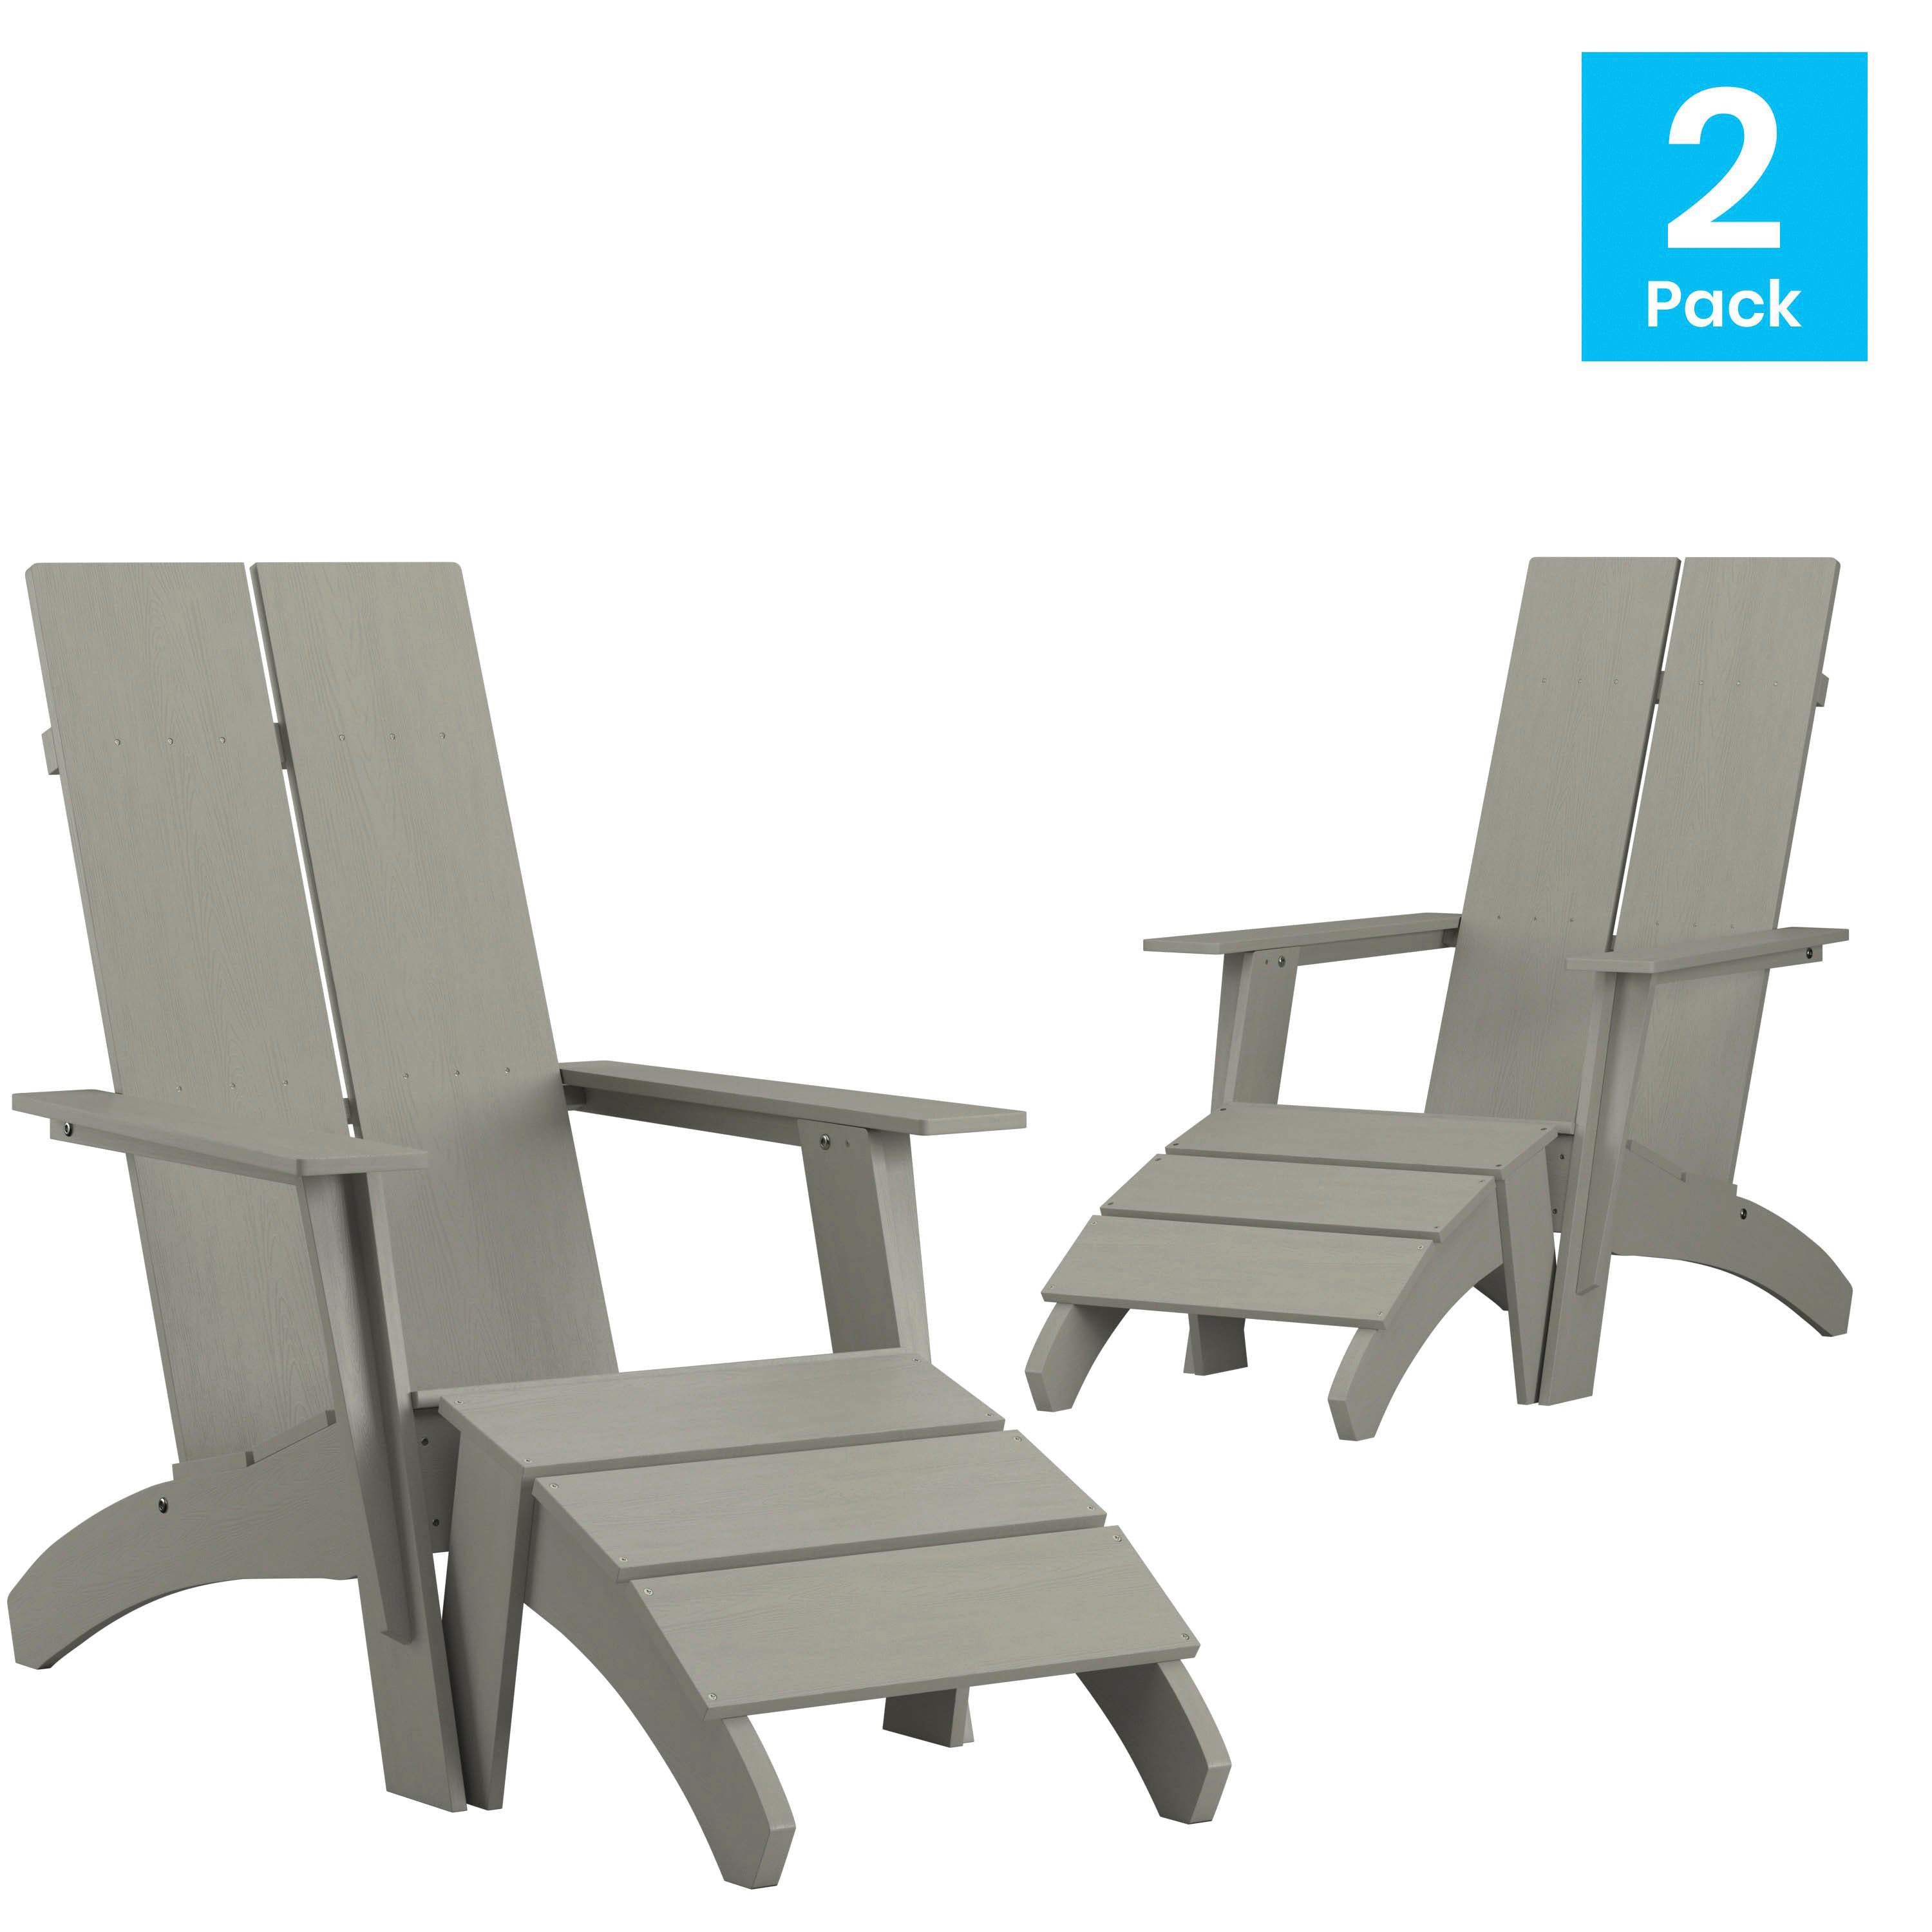 Set of 2 Sawyer Modern All-Weather Poly Resin Wood Adirondack Chairs with Foot Rests-Outdoor Chair-Flash Furniture-Wall2Wall Furnishings